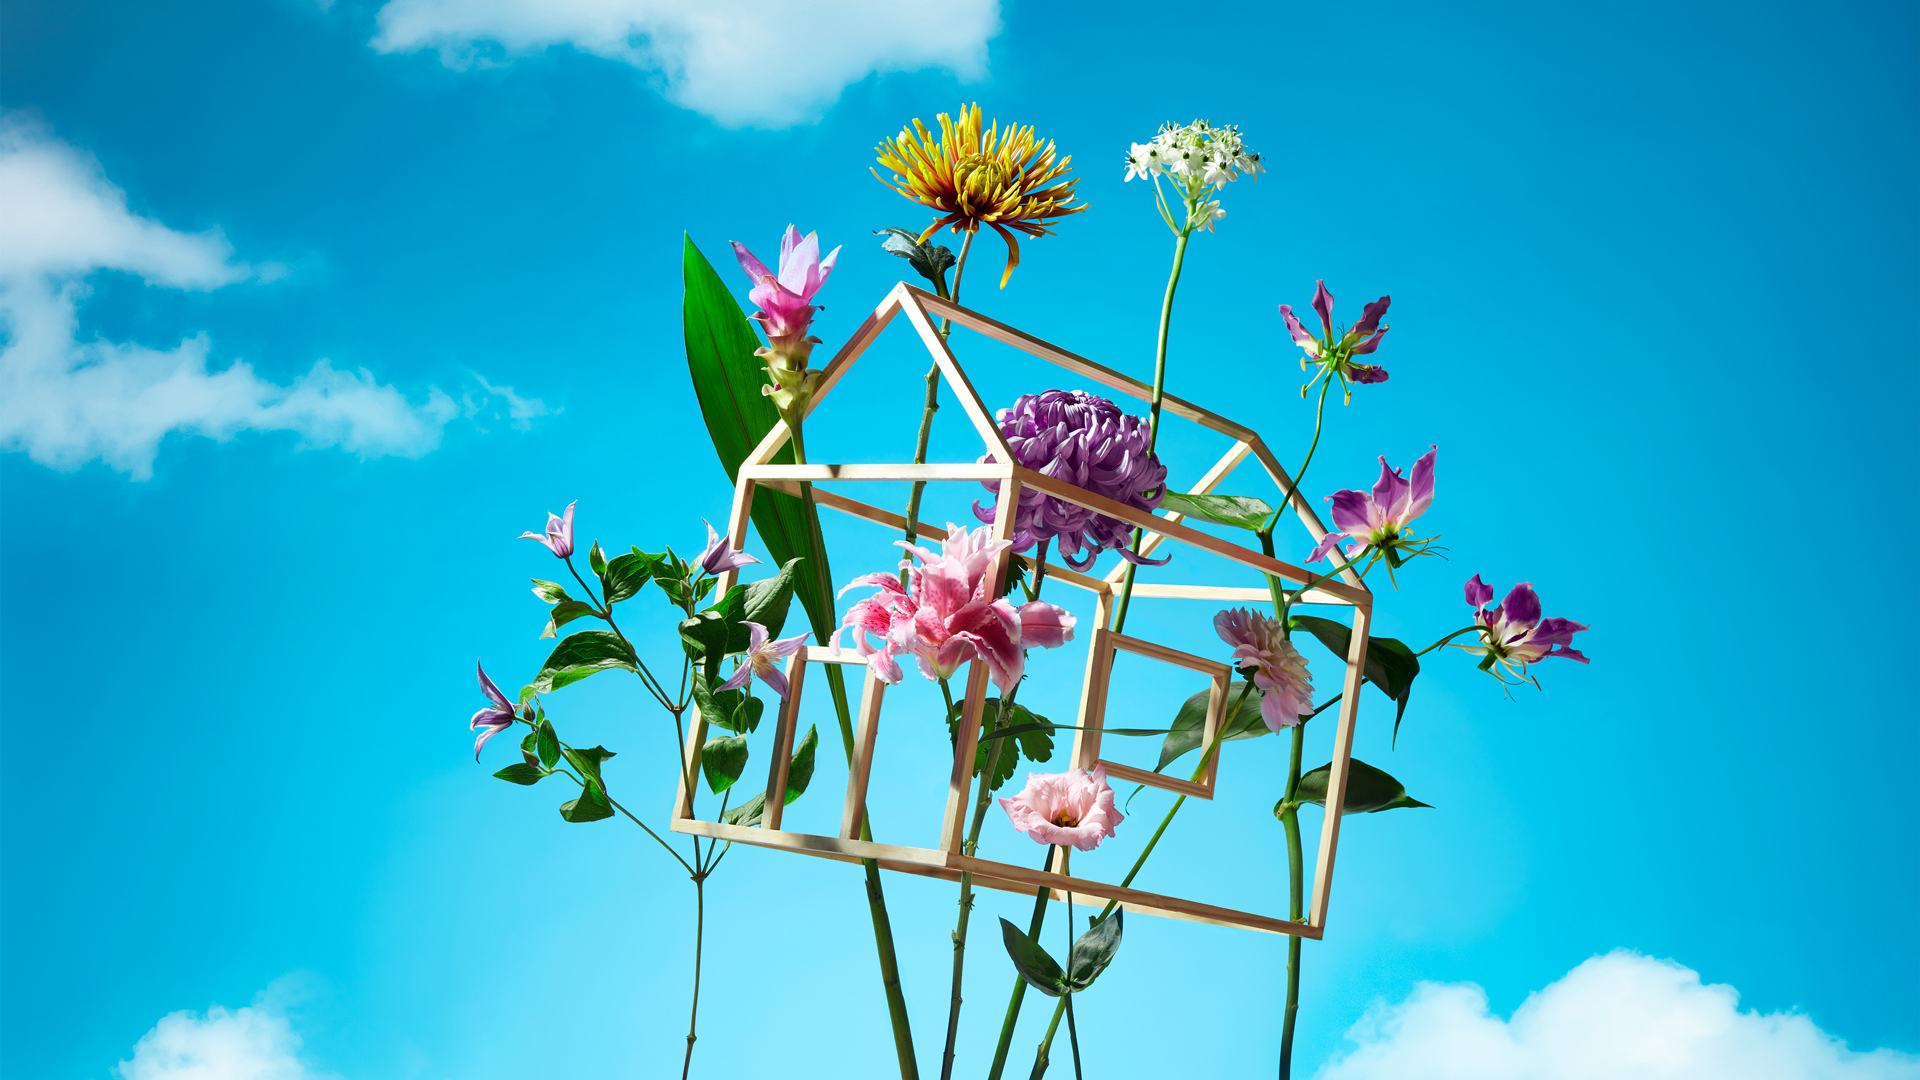 Wooden frame house filled with flowers against bright blue sky